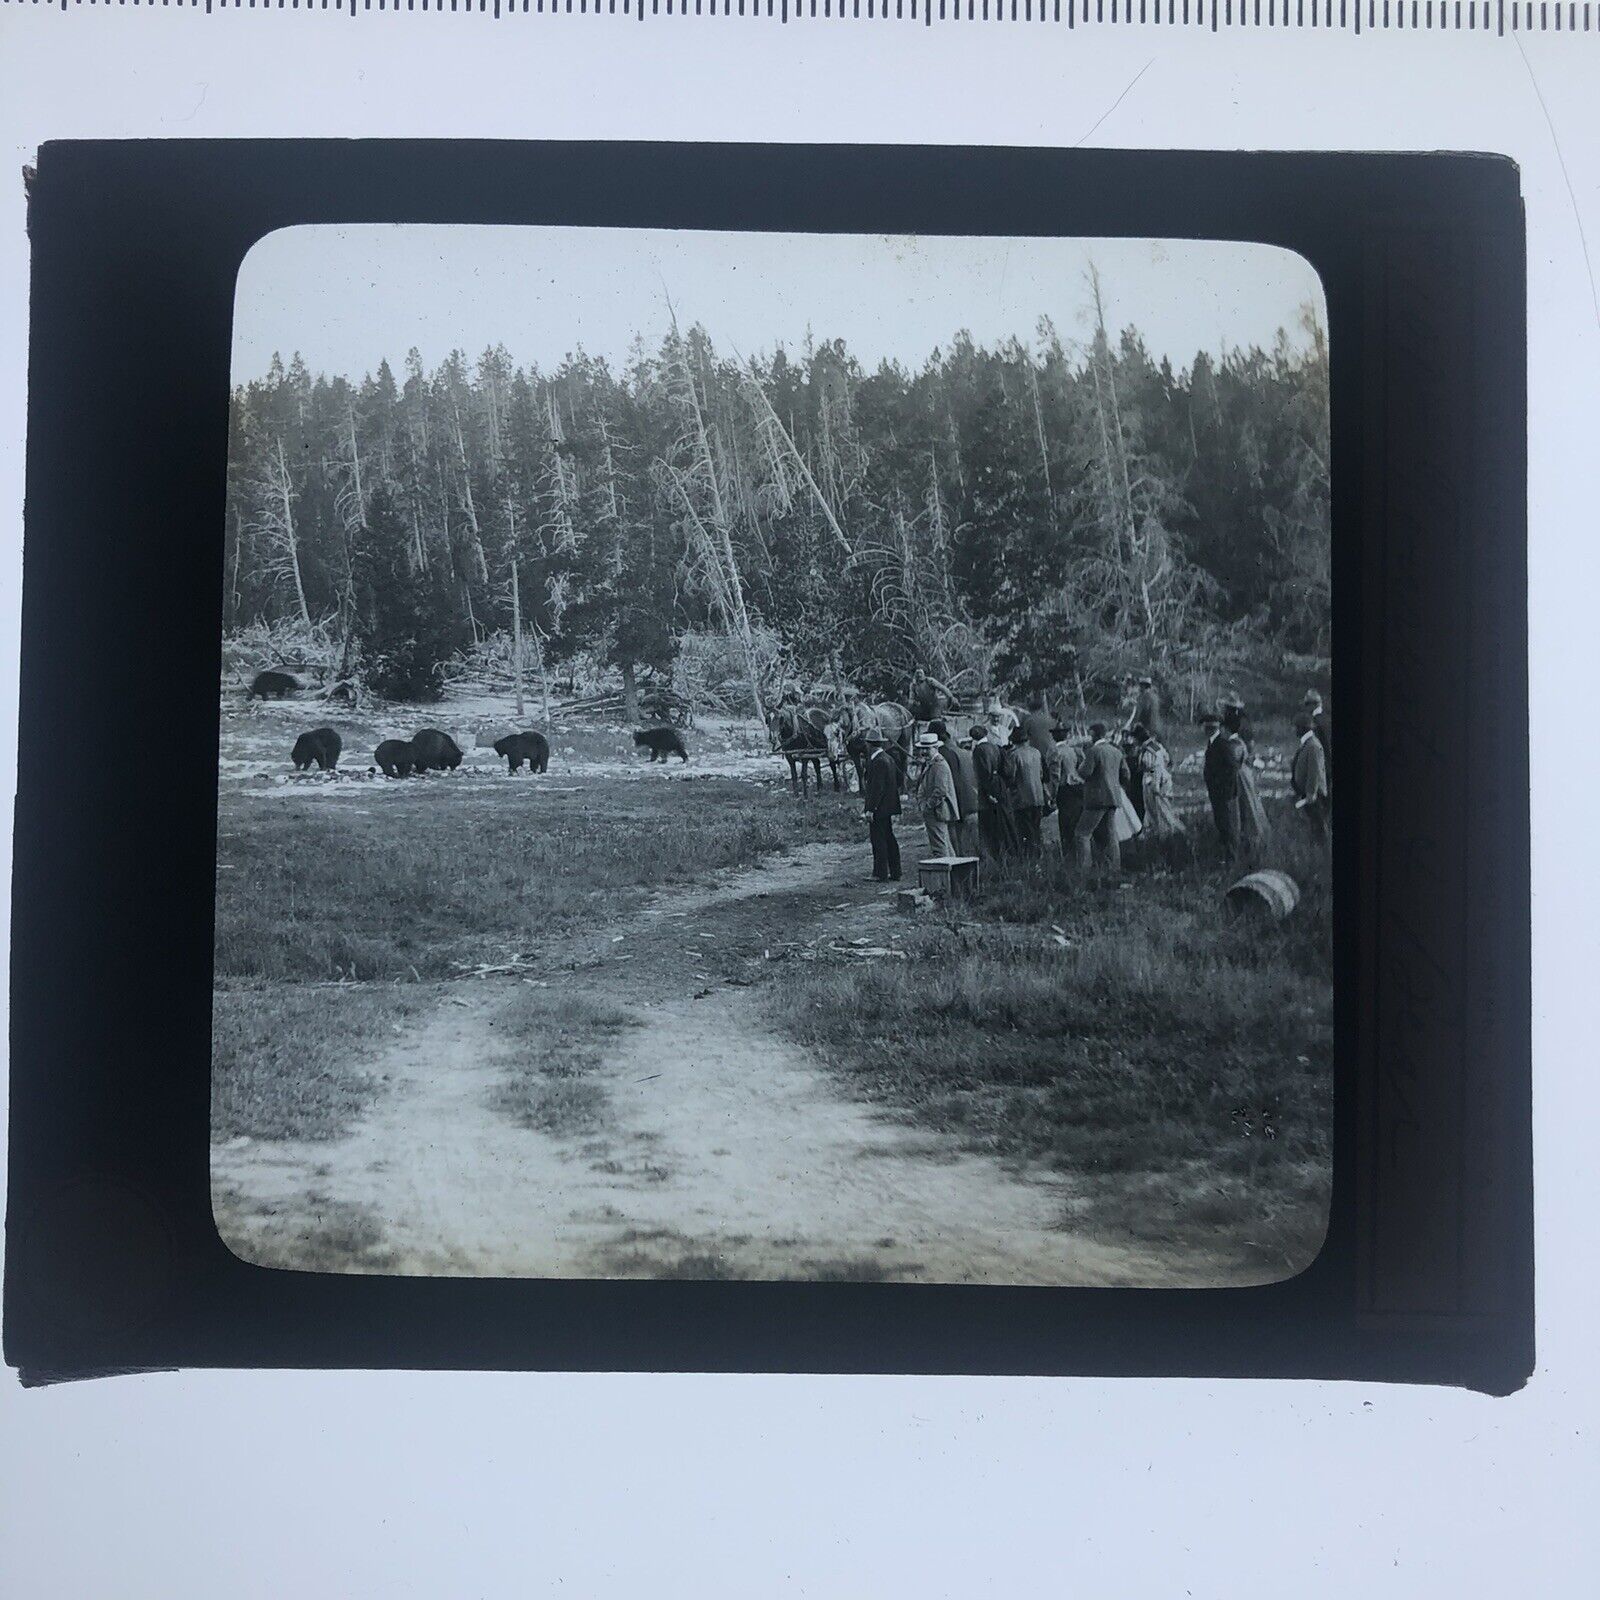 Antique Glass Slide Tourists And Bear Some Mid West Clearing